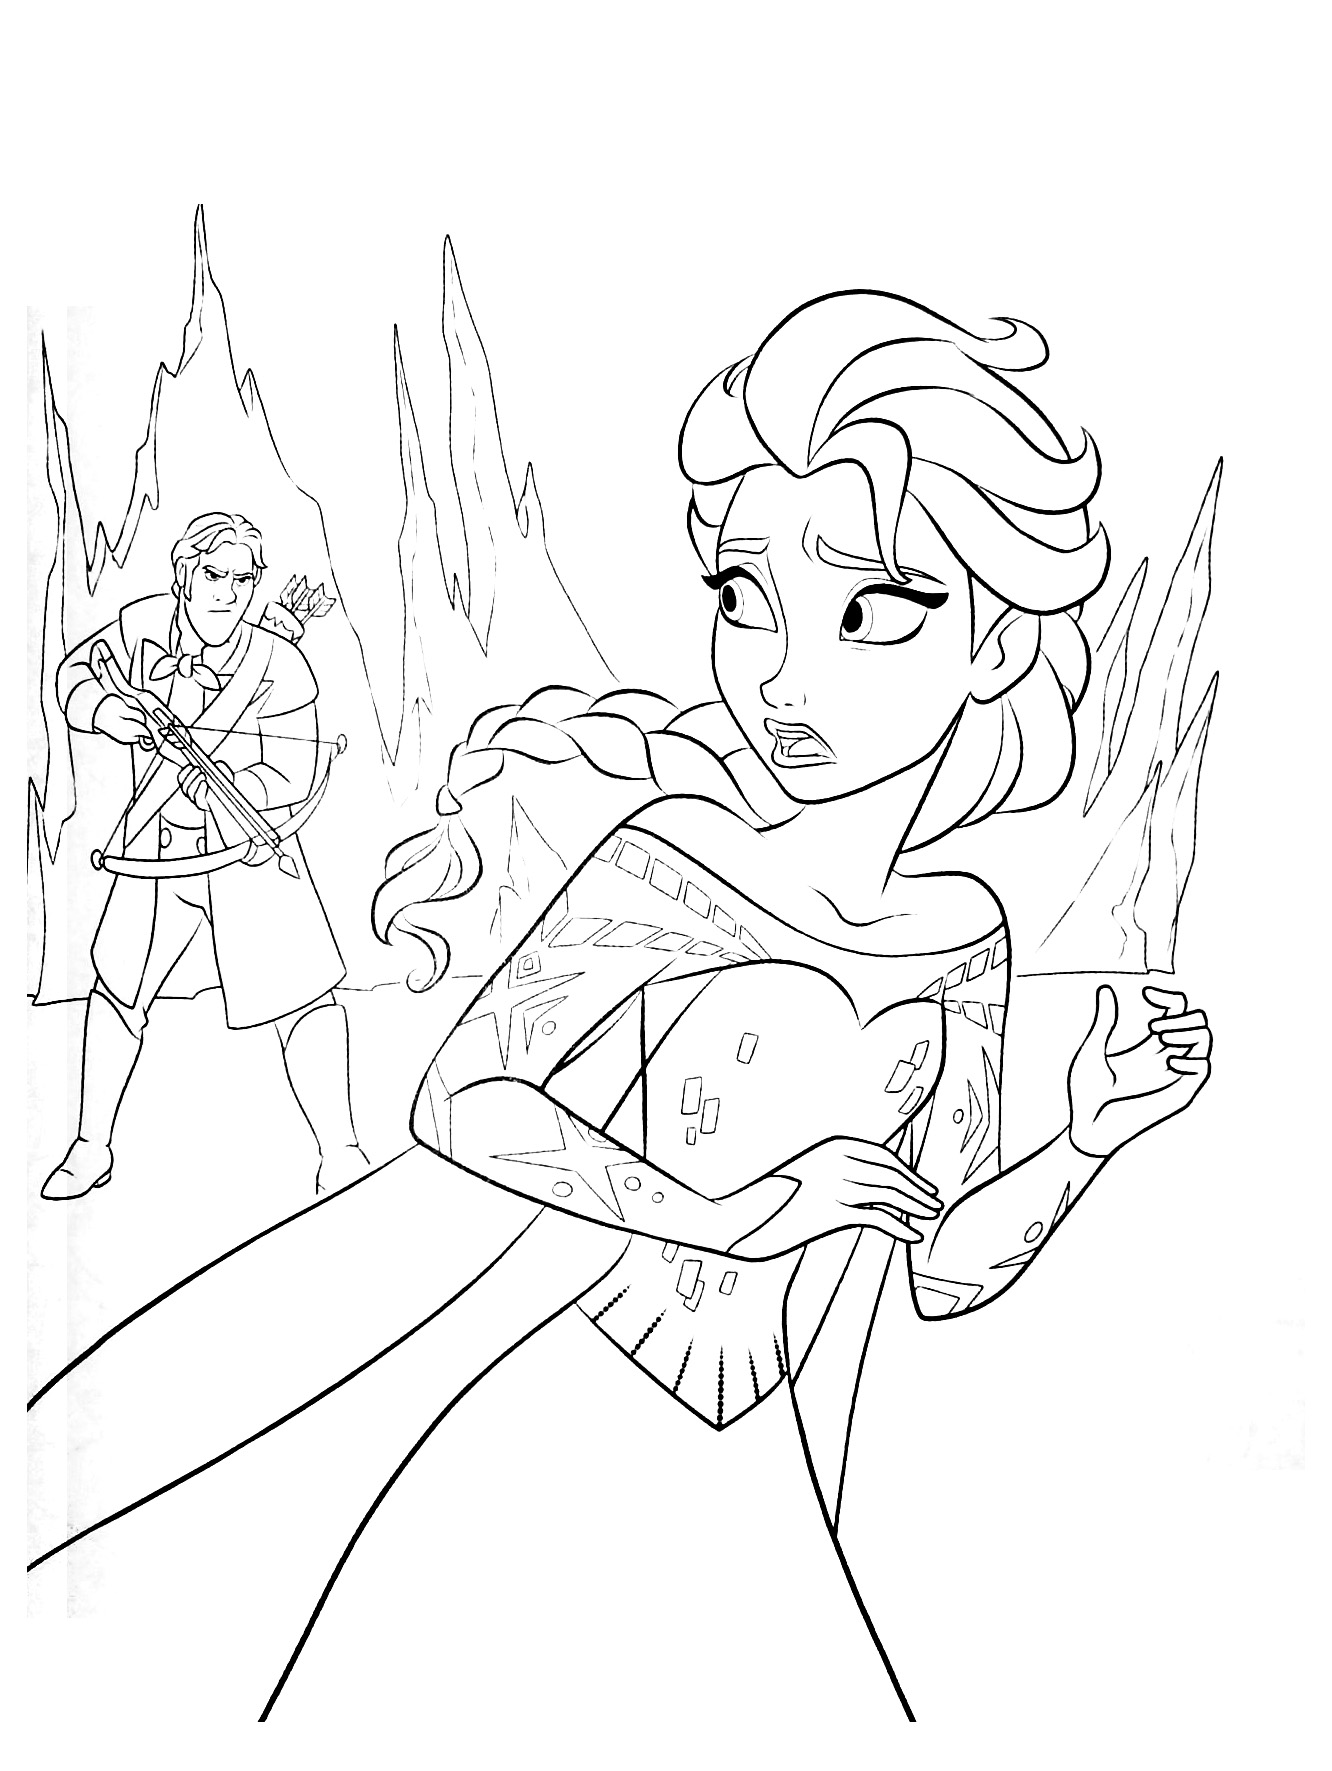 Easy free Frozen coloring page to download : Elsa